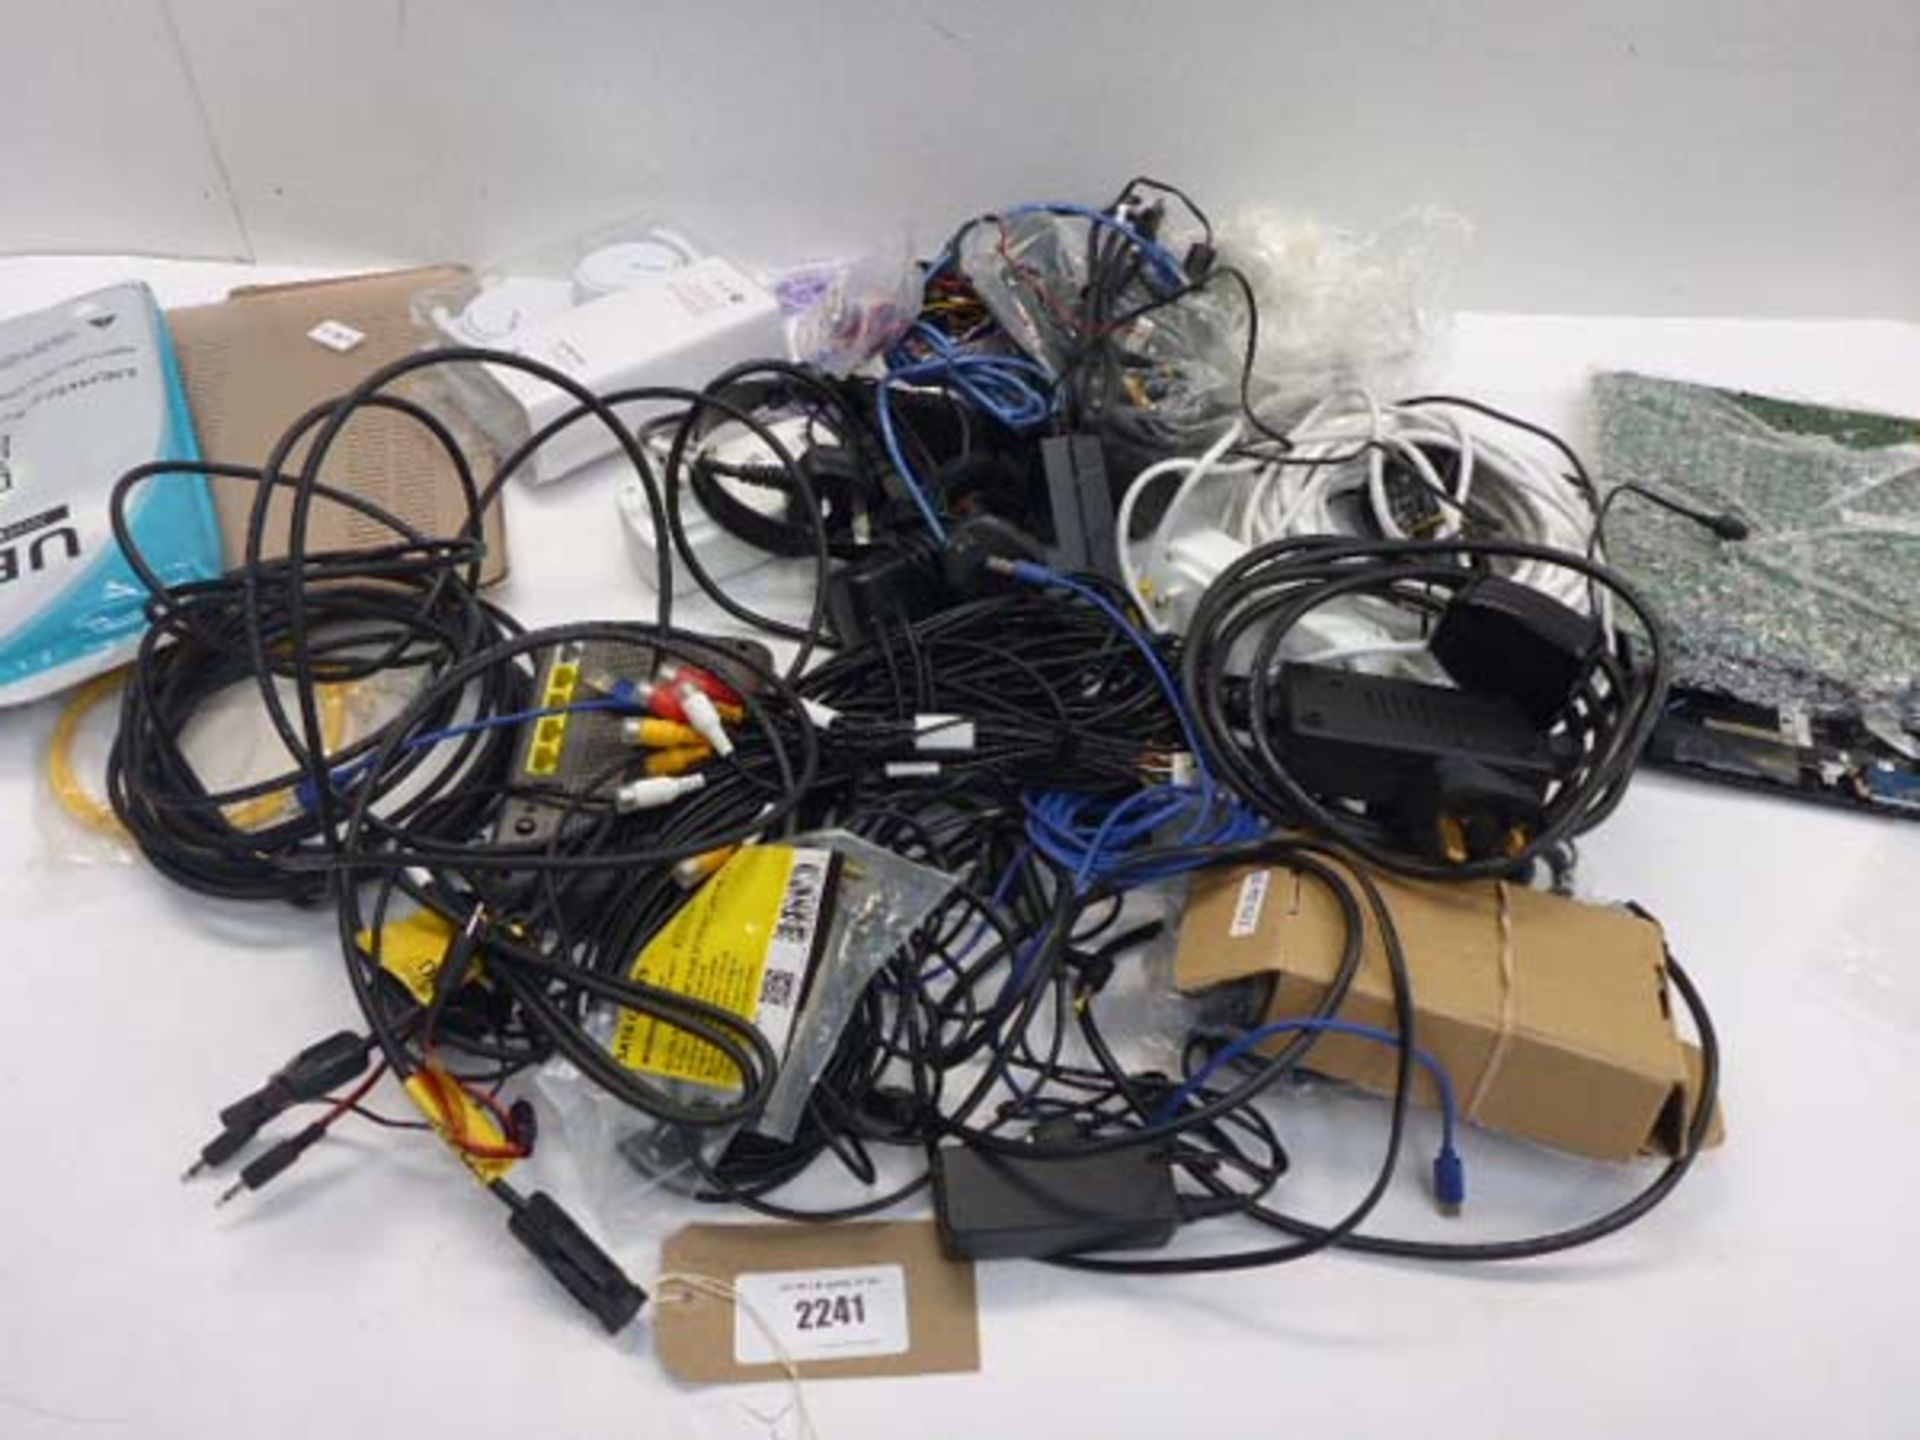 Bag containing quantity of various electrical related accessories; cables, PSUs, Sony laptop